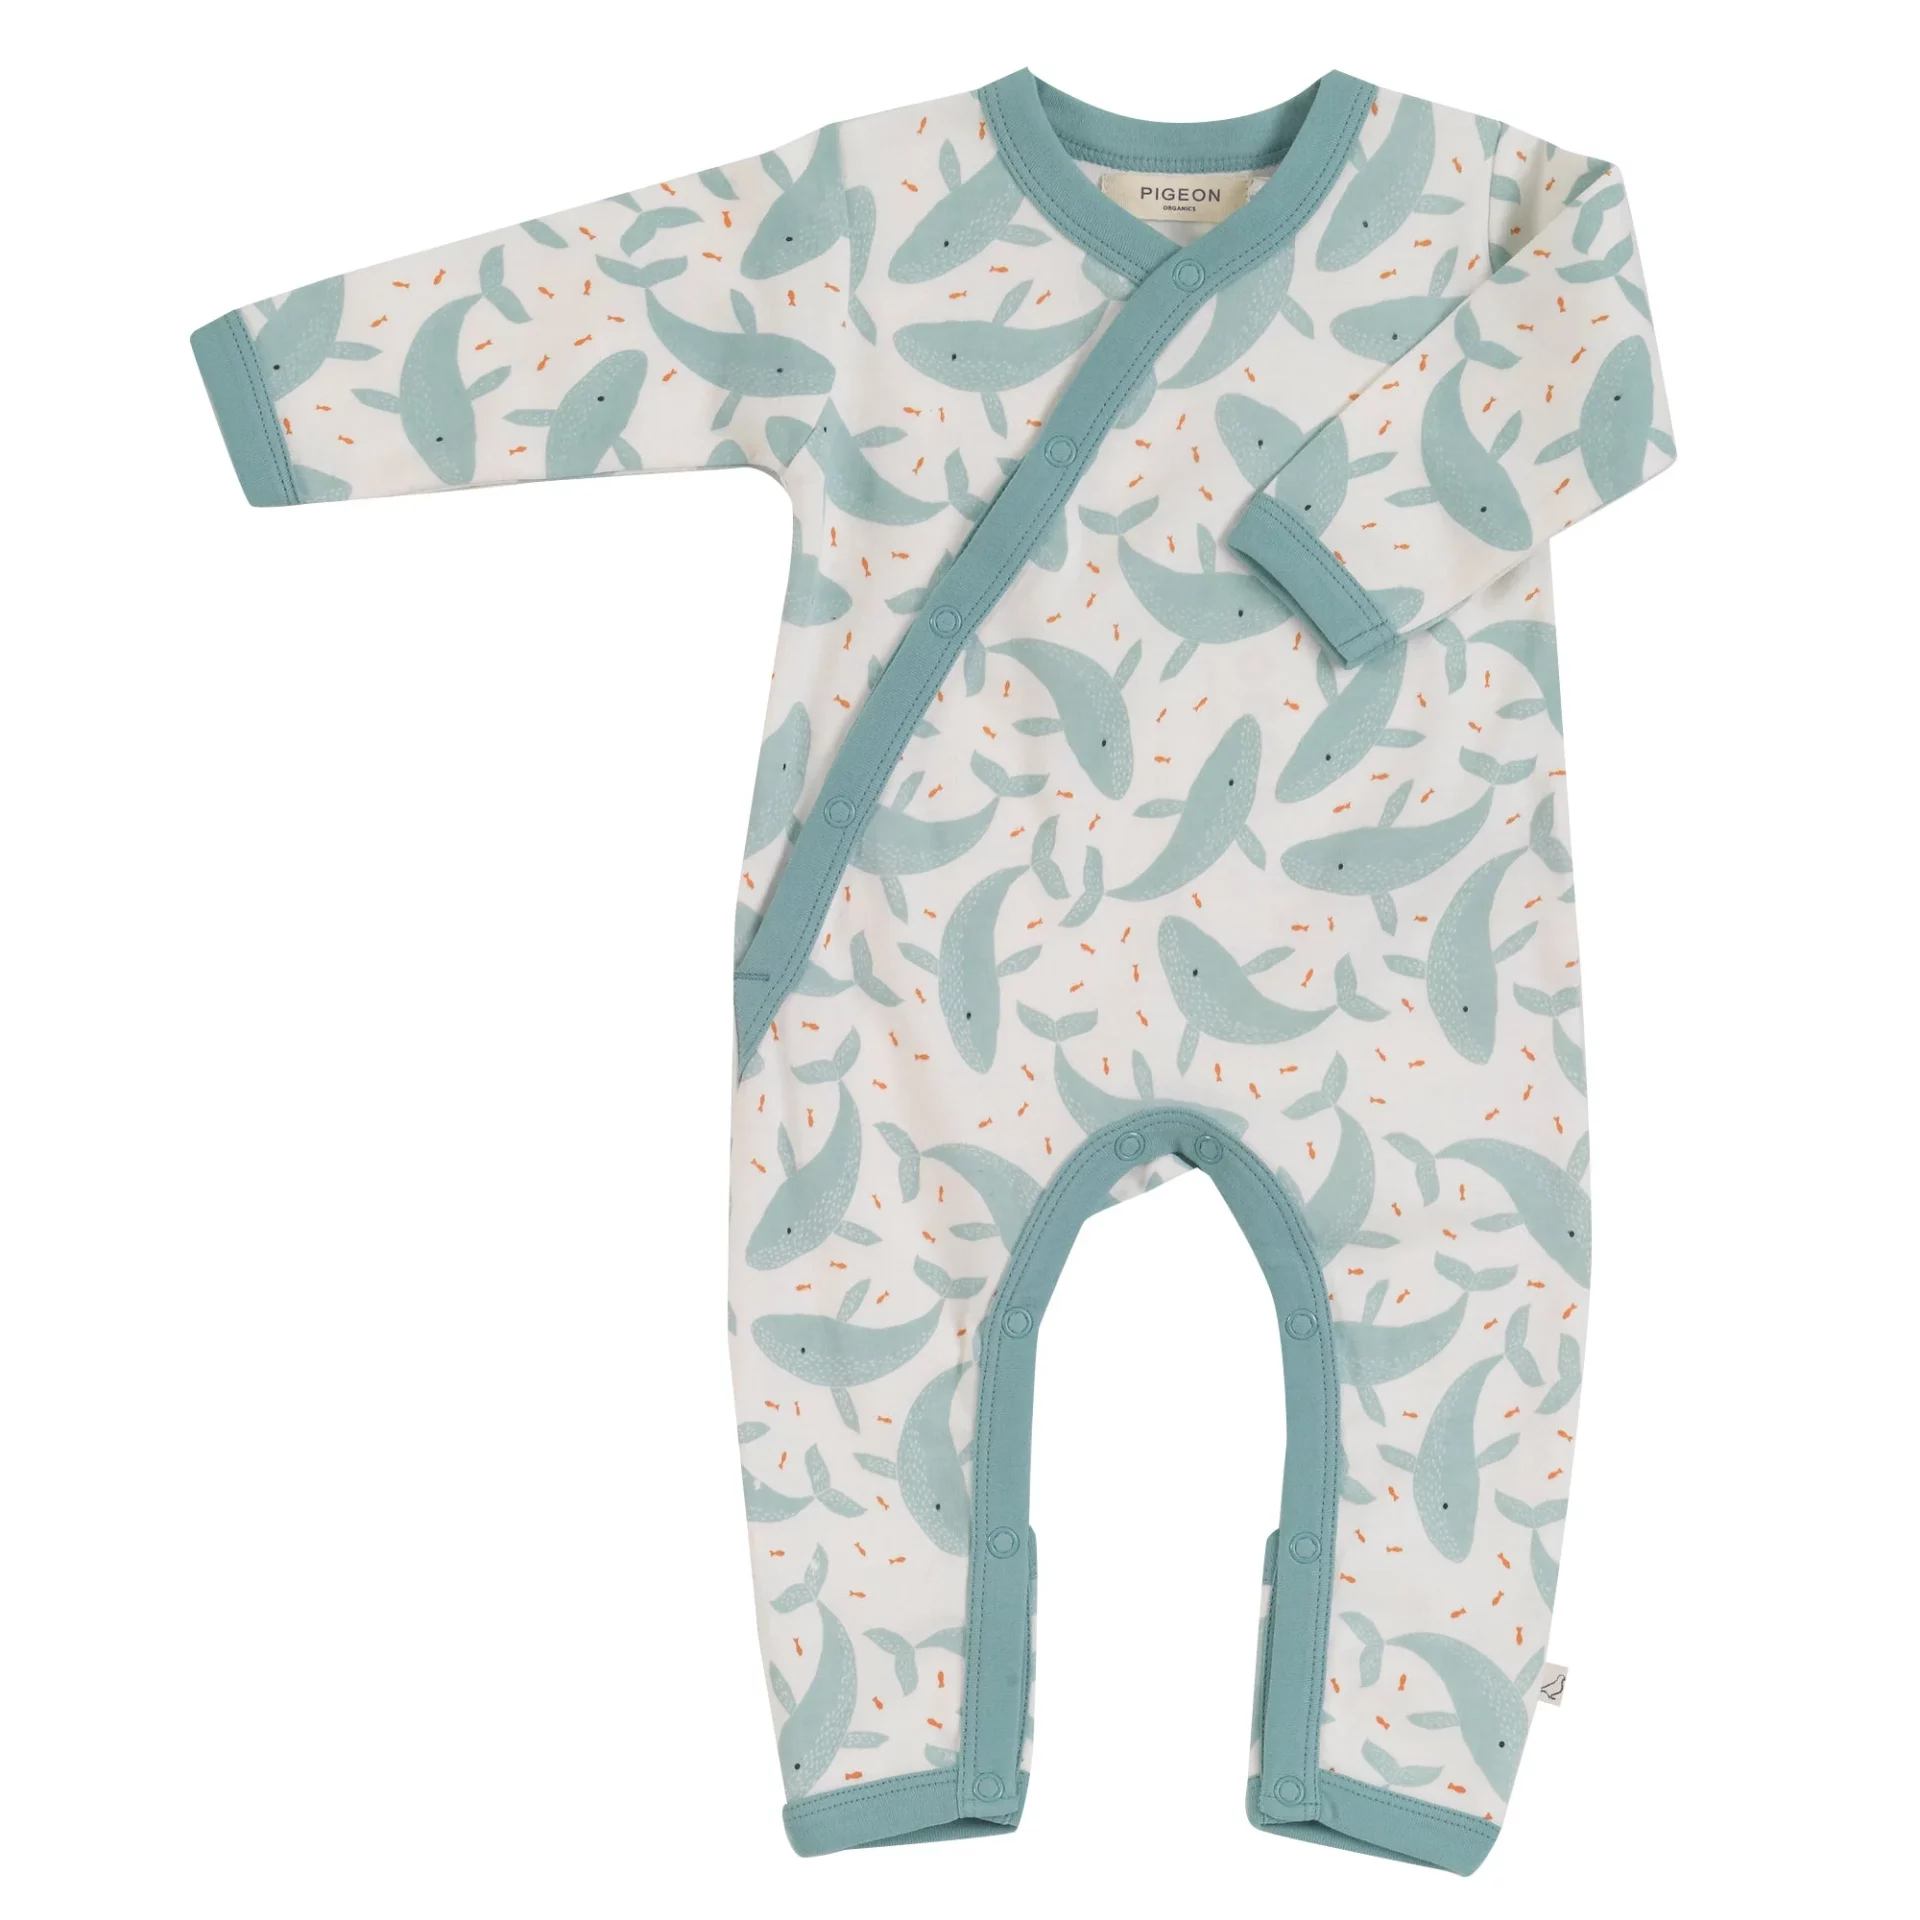 Kimono Romper Whales turquoise by Pigeon Organics SS23